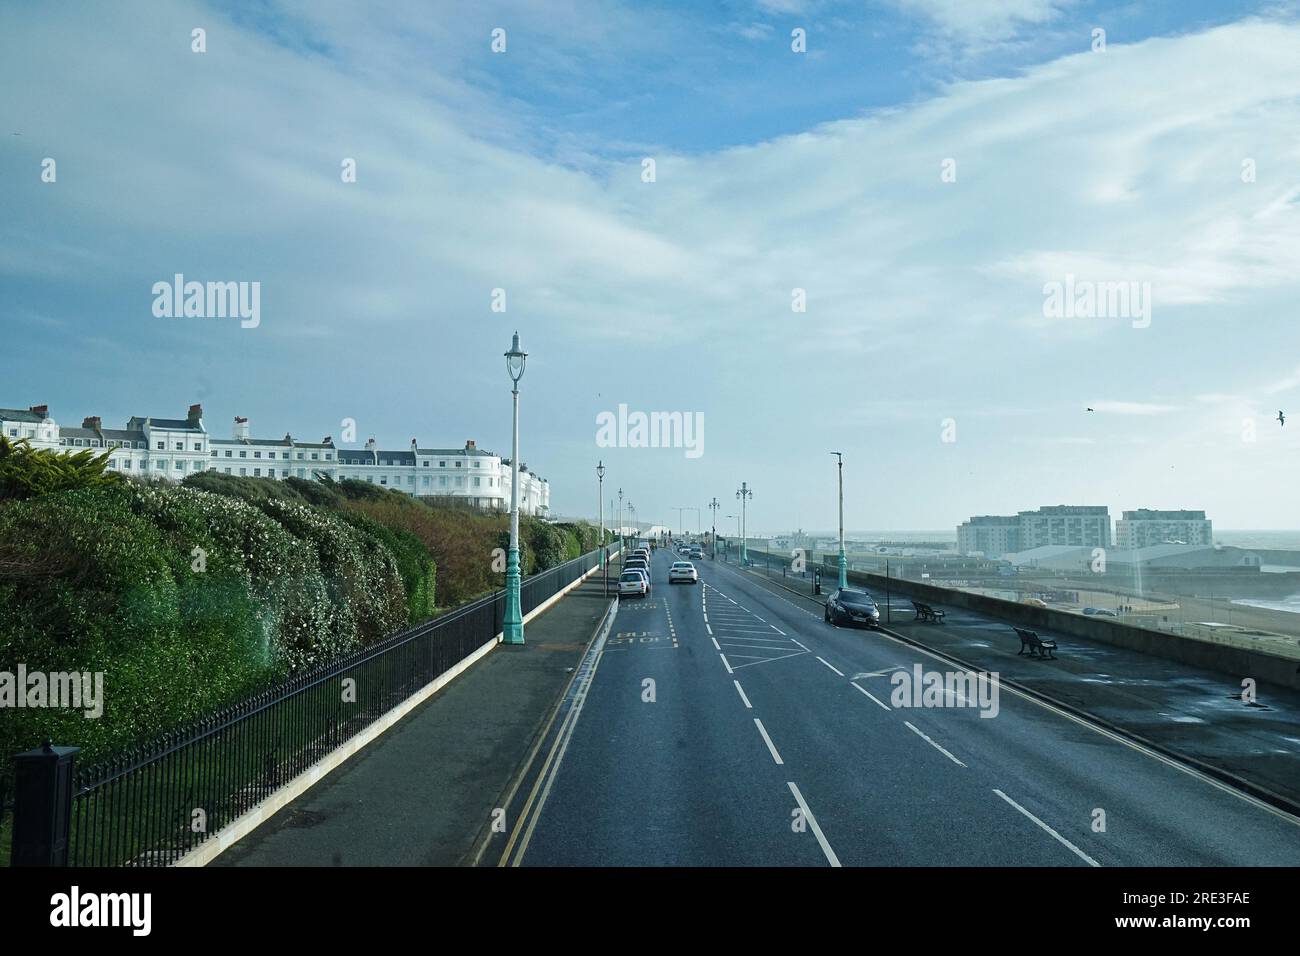 Exterior European architecture and urban building design of Brighton pier street and town with cloudy blue sky view- England, United Kingdom Stock Photo